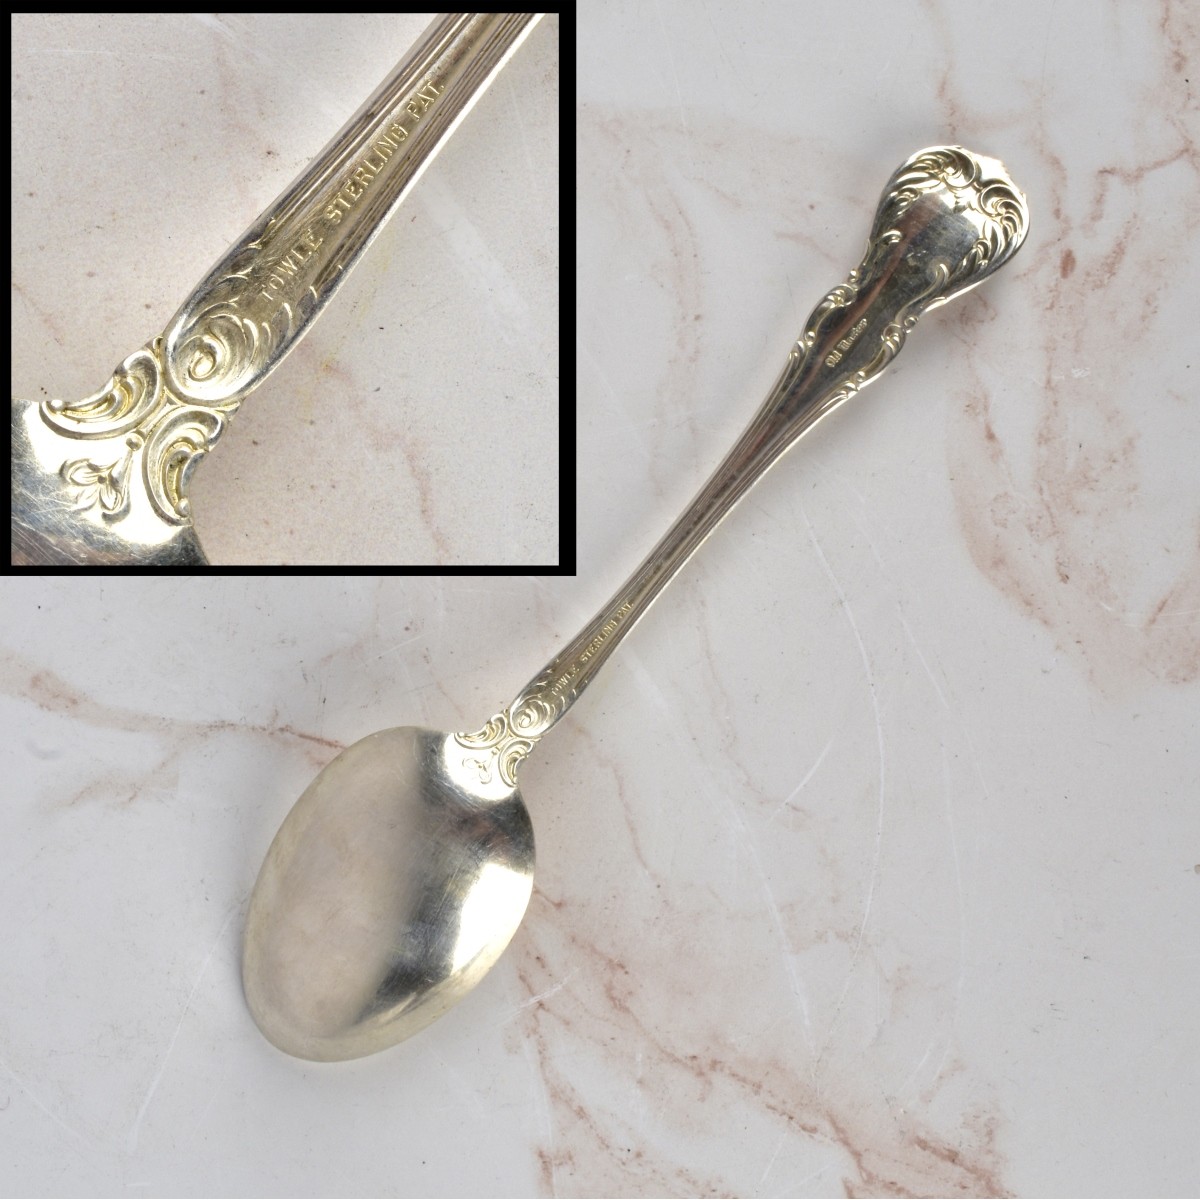 Towle "Old Master" Tablespoons